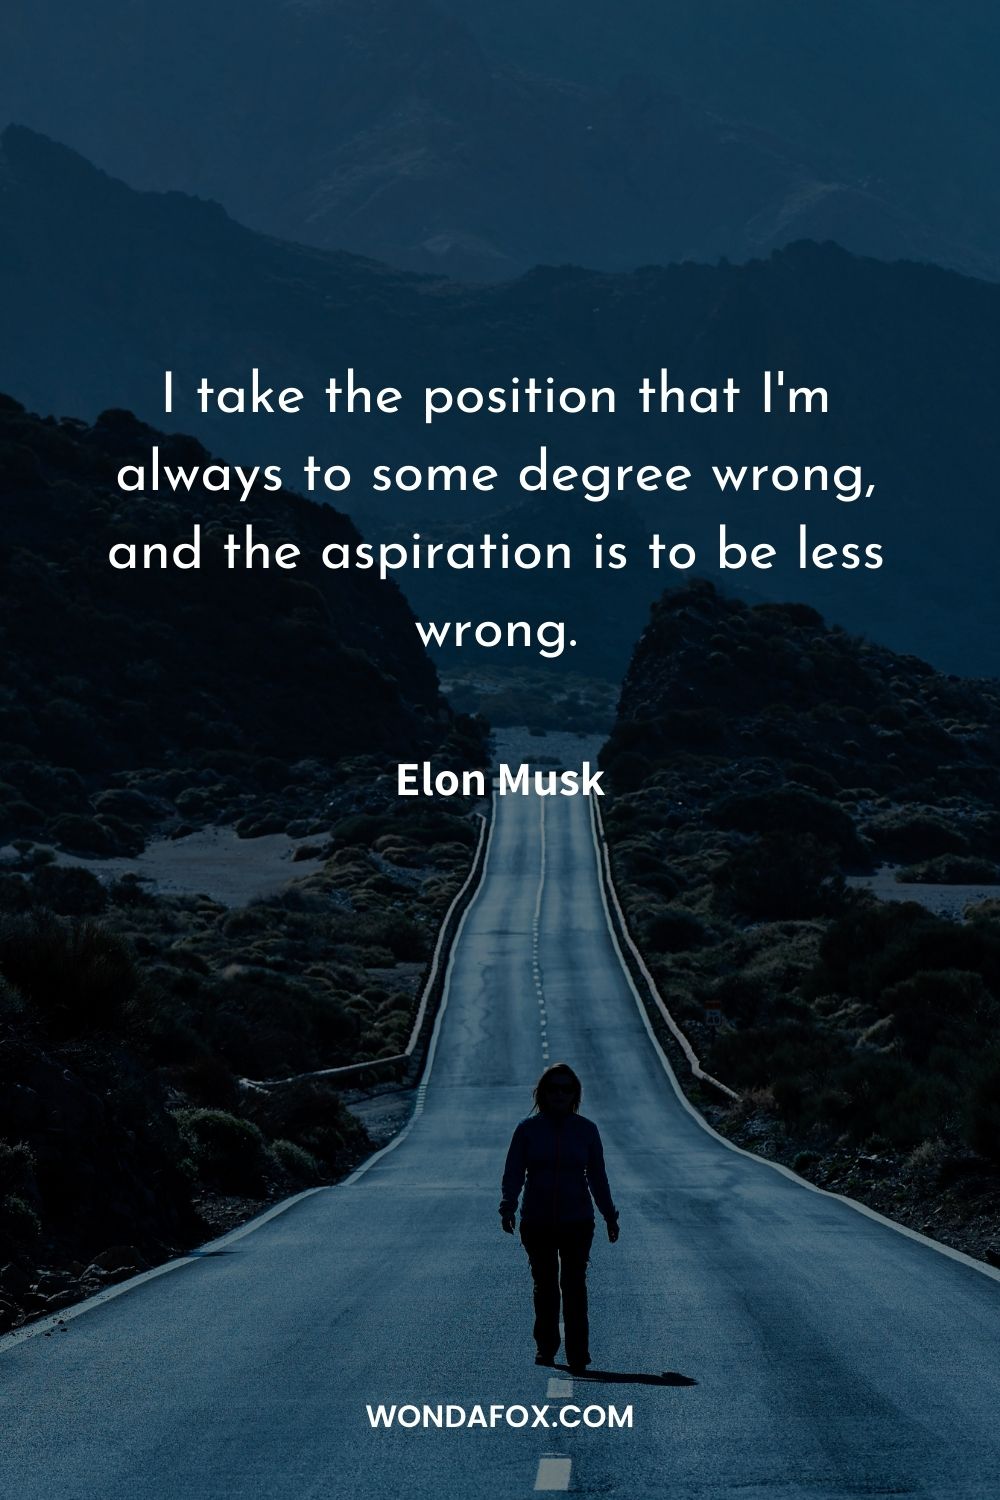 I take the position that I'm always to some degree wrong, and the aspiration is to be less wrong.